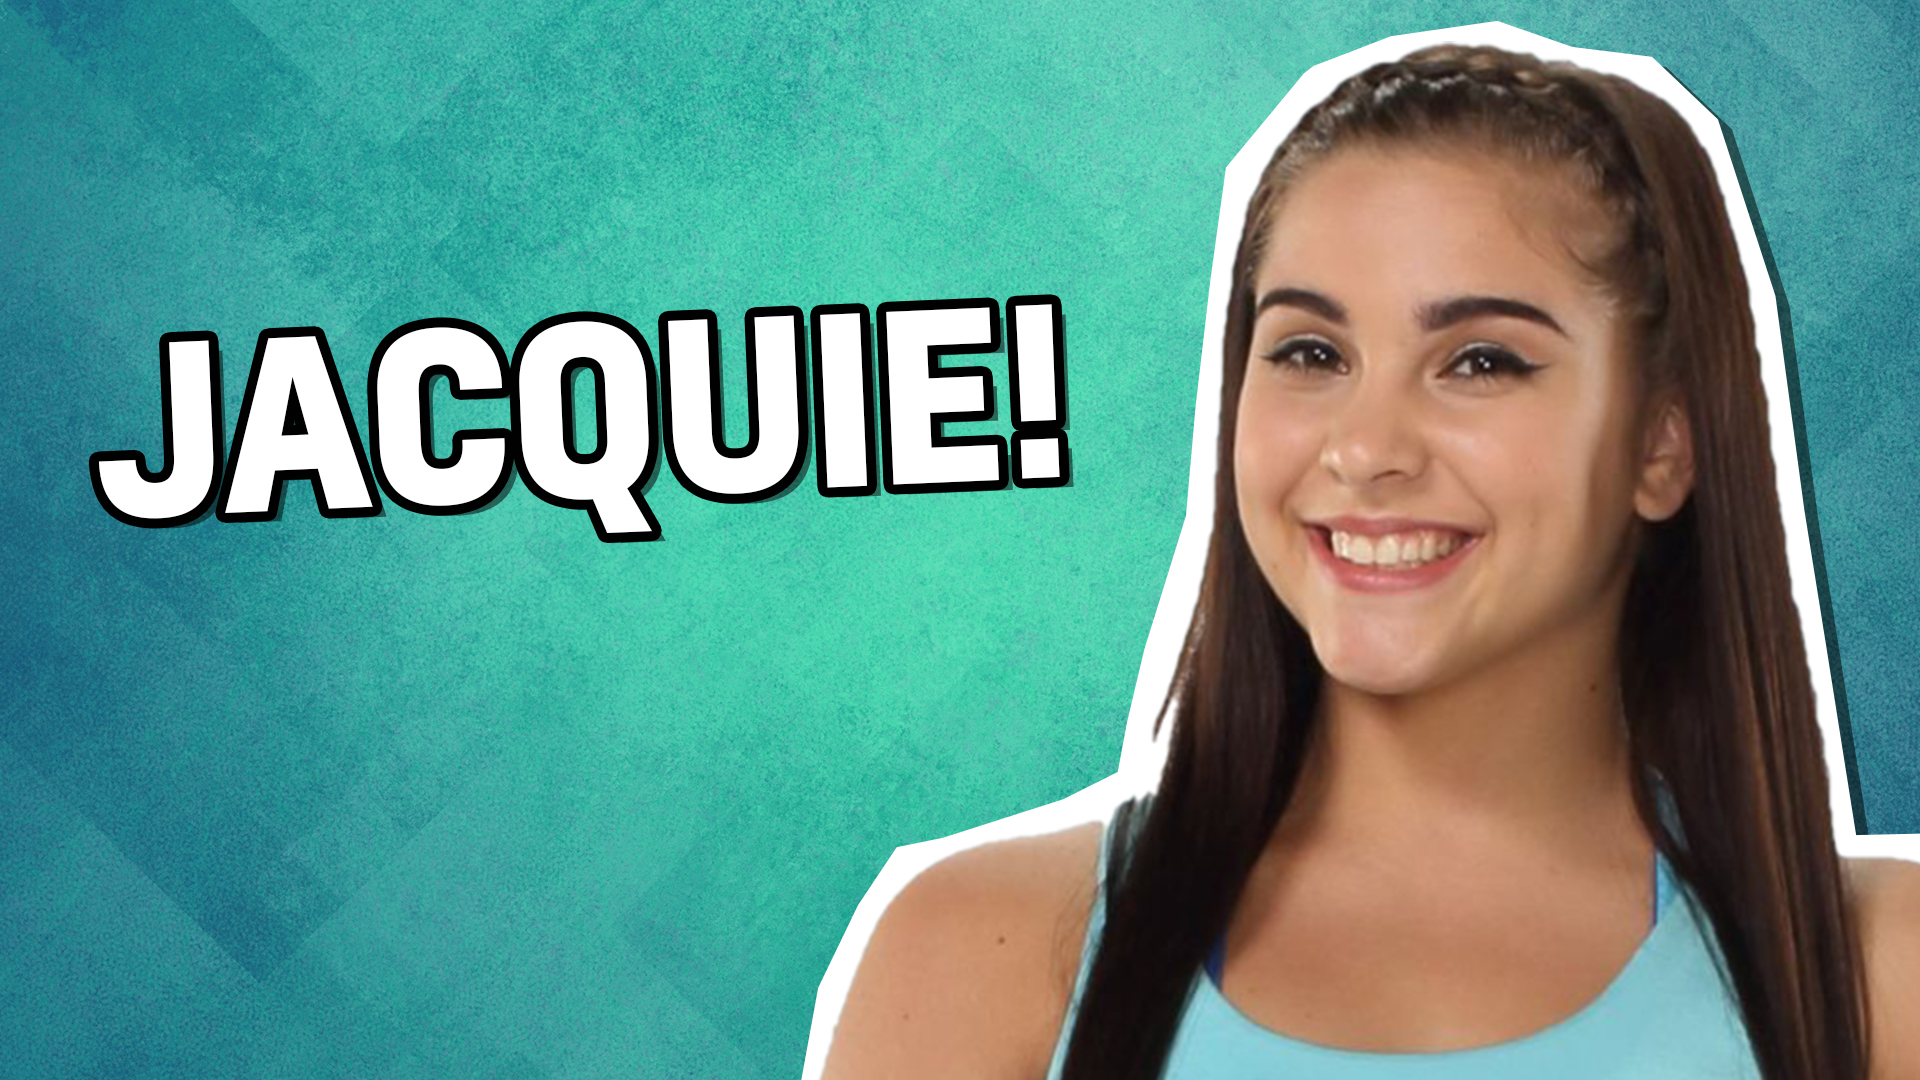 Jacquie from The Next Step